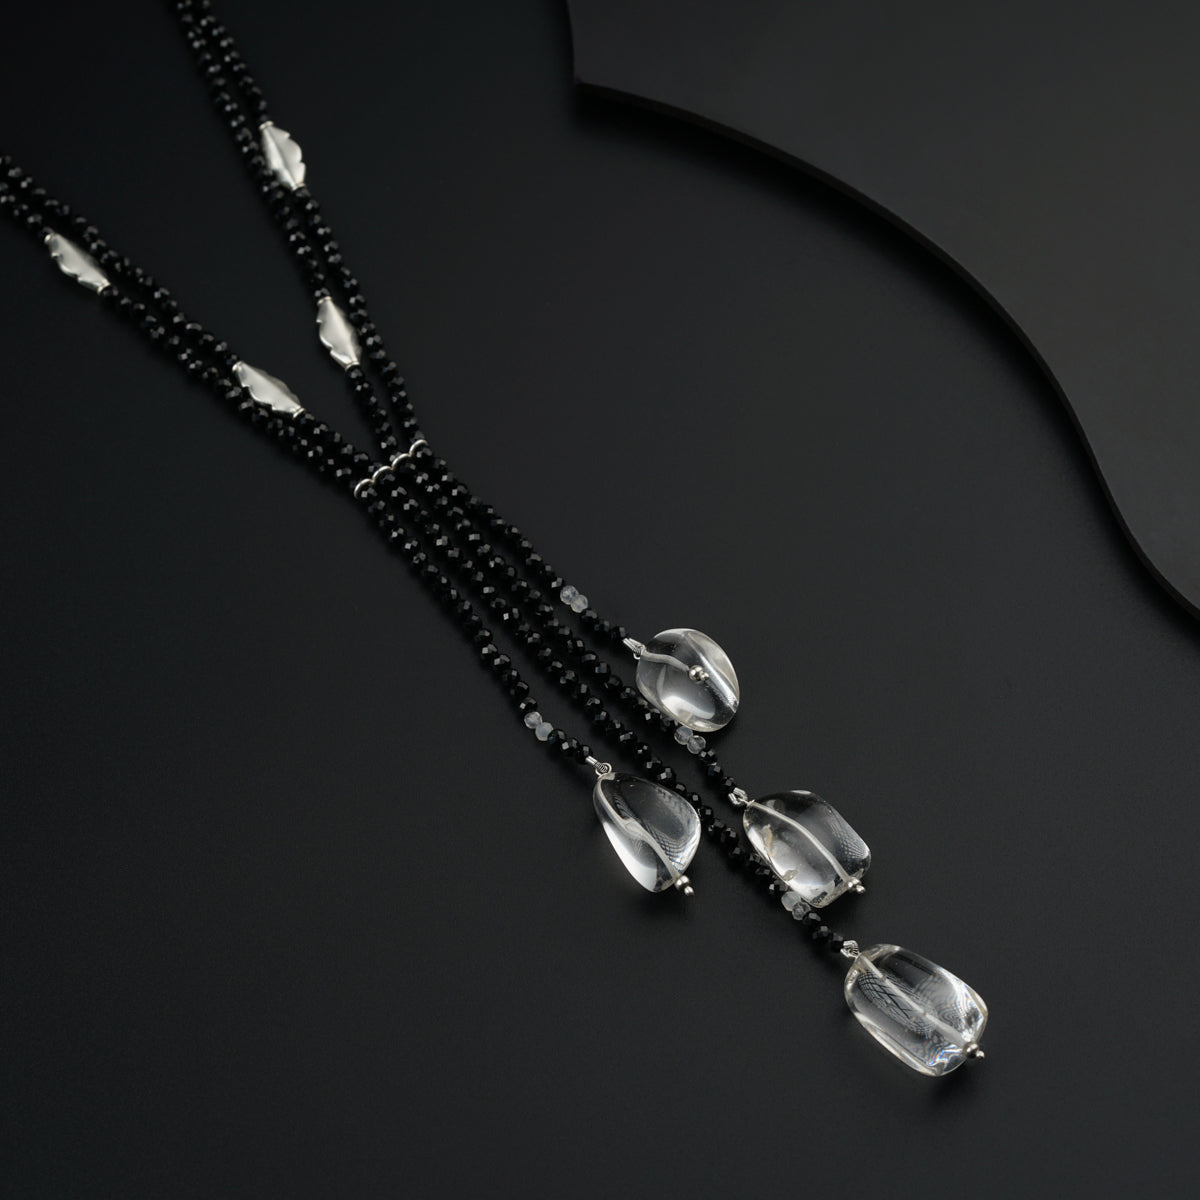 Yin Yang: Silver Necklace with Black Spinel, Crystals and Silver findings